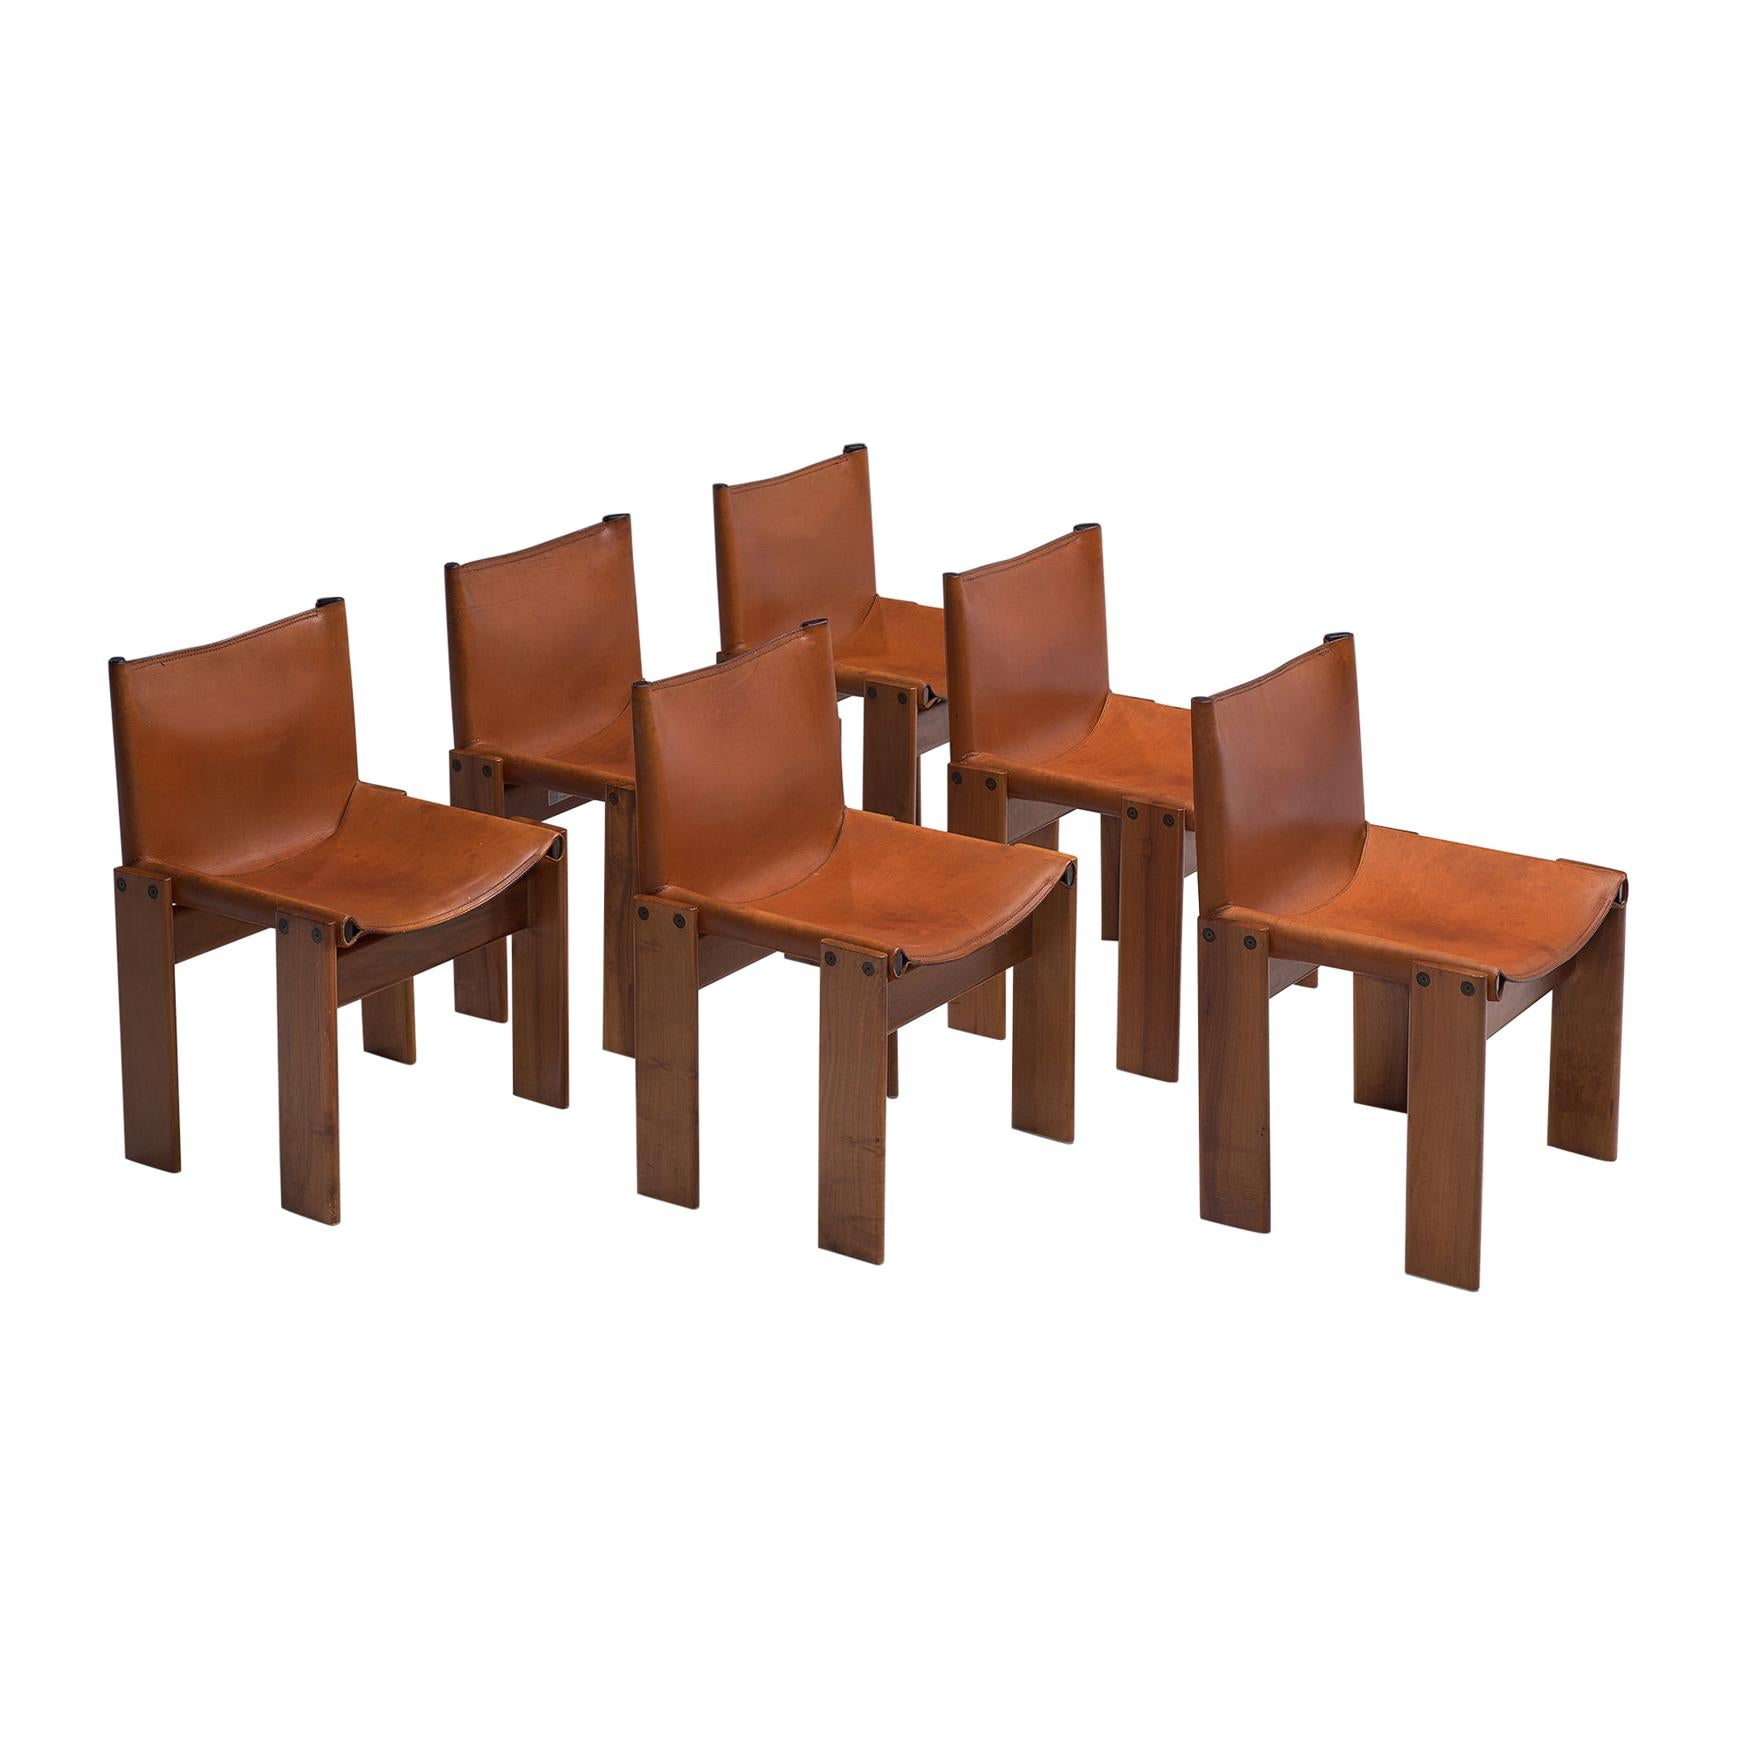 Afra & Tobia Scarpa Six Monk Chairs in Cognac Leather